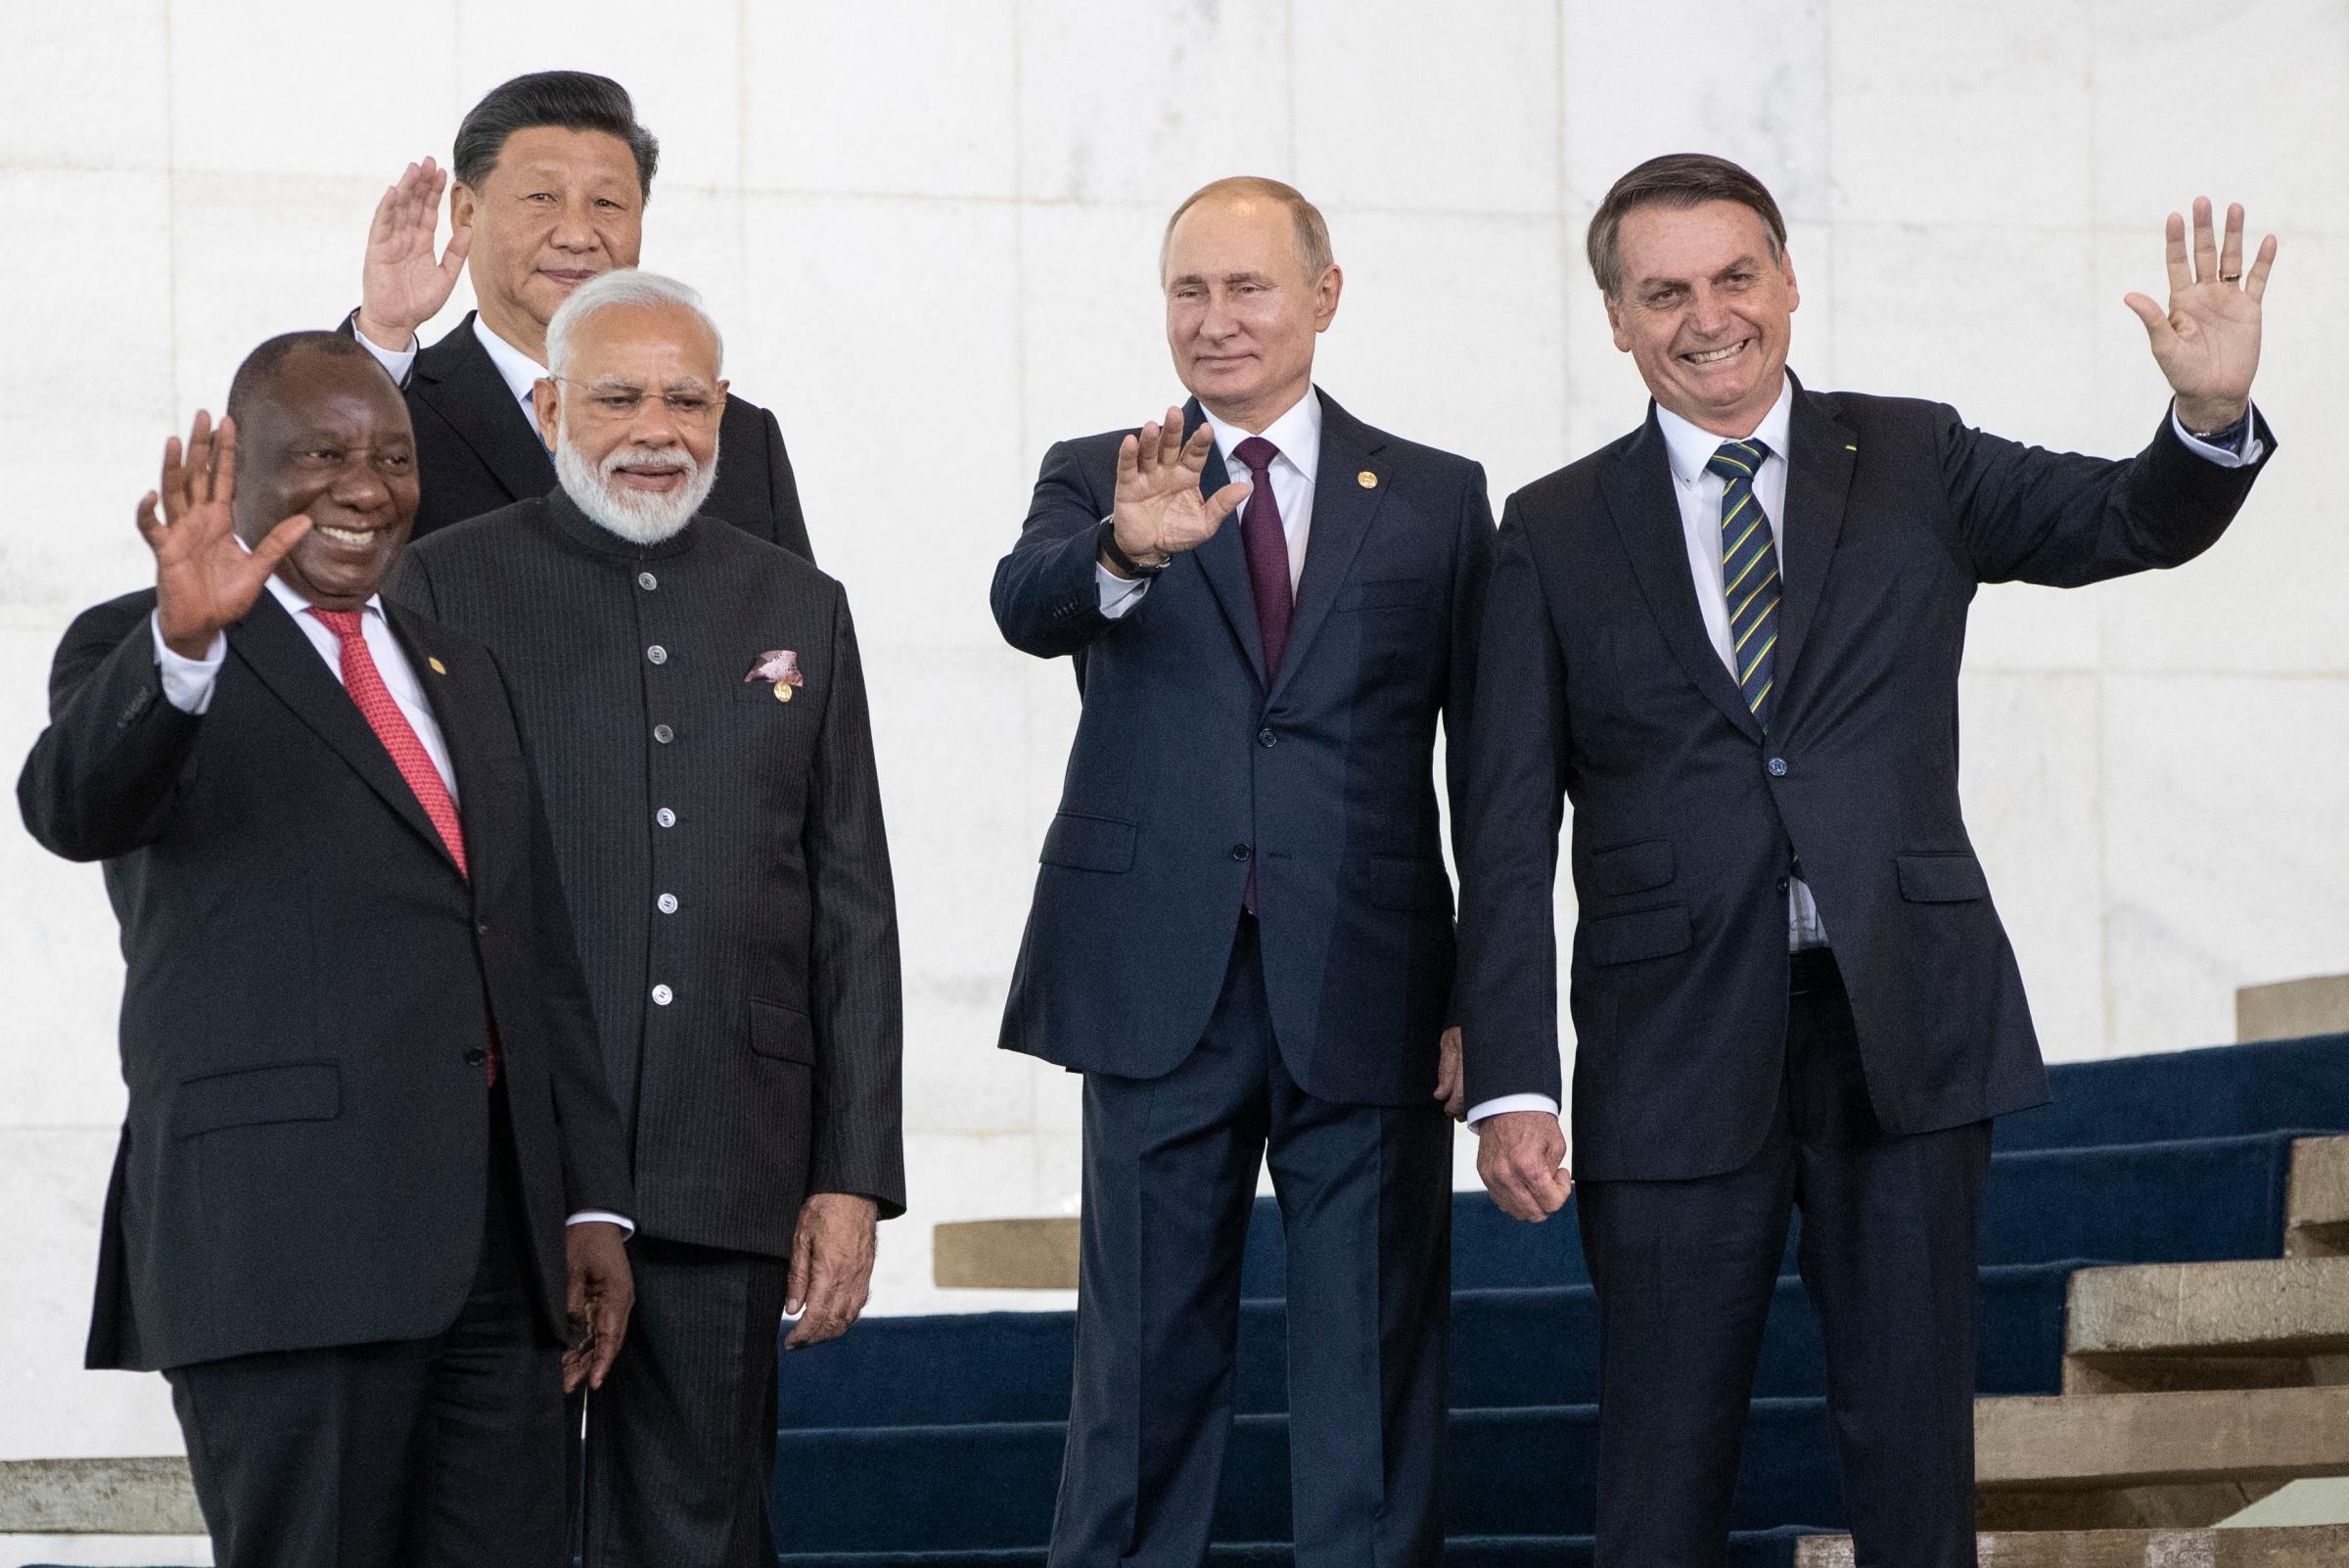 From left to right, South Africa's President Cyril Ramaphosa, China's President Xi Jinping, India's Prime Minister Narendra Modi, Russia's President Vladimir Putin and Brazil's President Jair Bolsonaro pose for a photo at the BRICS emerging economies at the Itamaraty palace in Brasilia, Brazil, Thursday, Nov. 14, 2019.